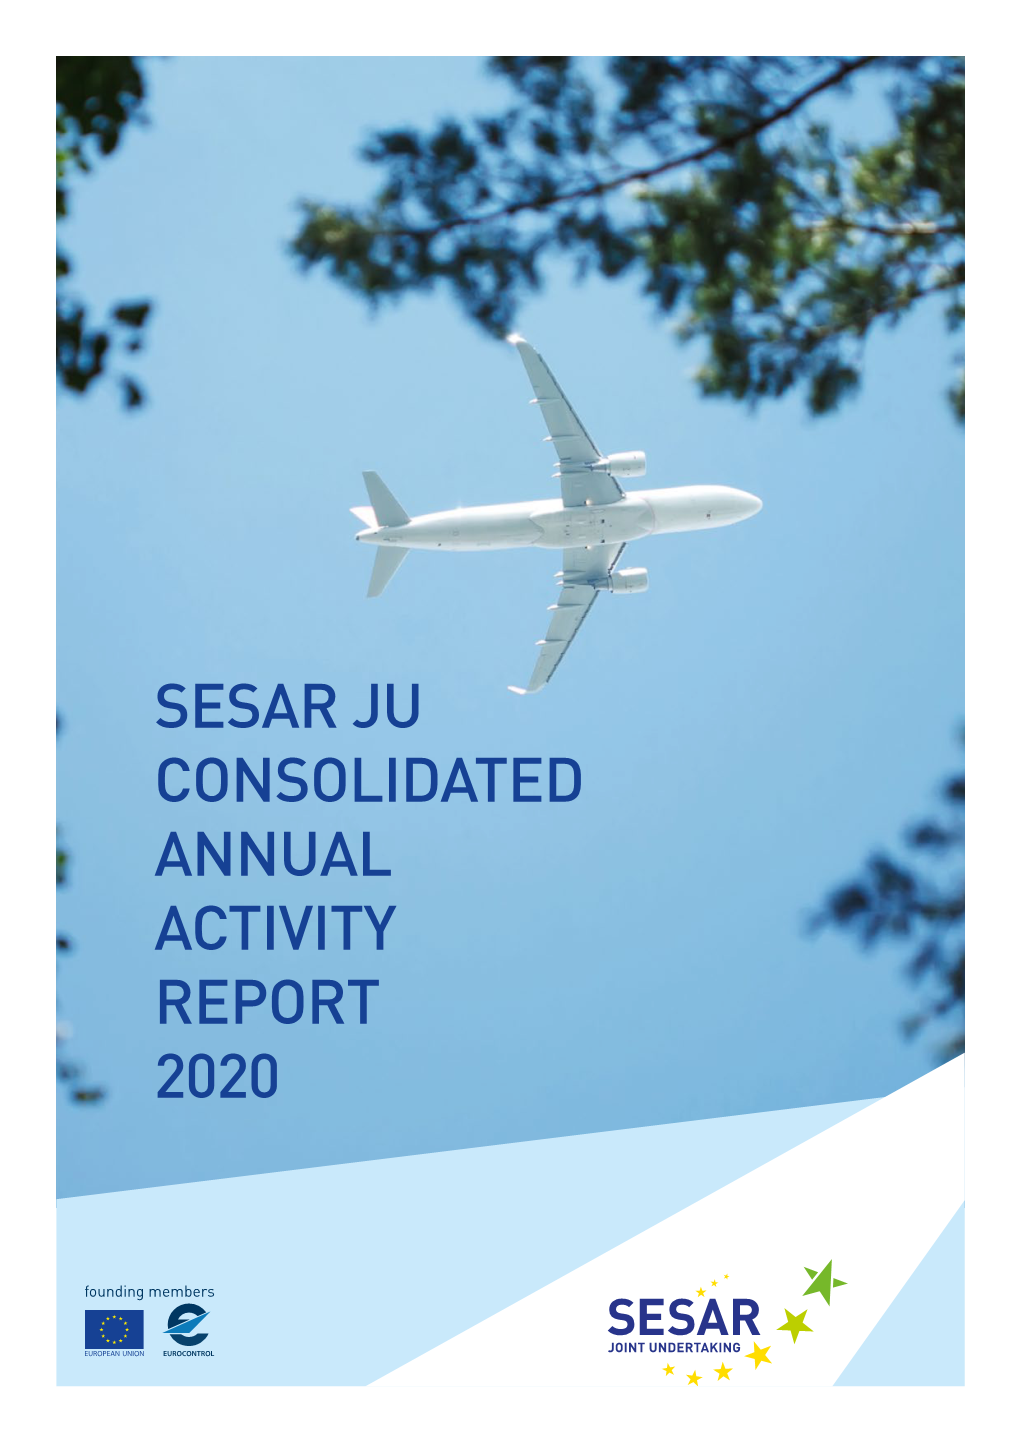 SESAR JU CONSOLIDATED ANNUAL ACTIVITY REPORT 2020 Abstract